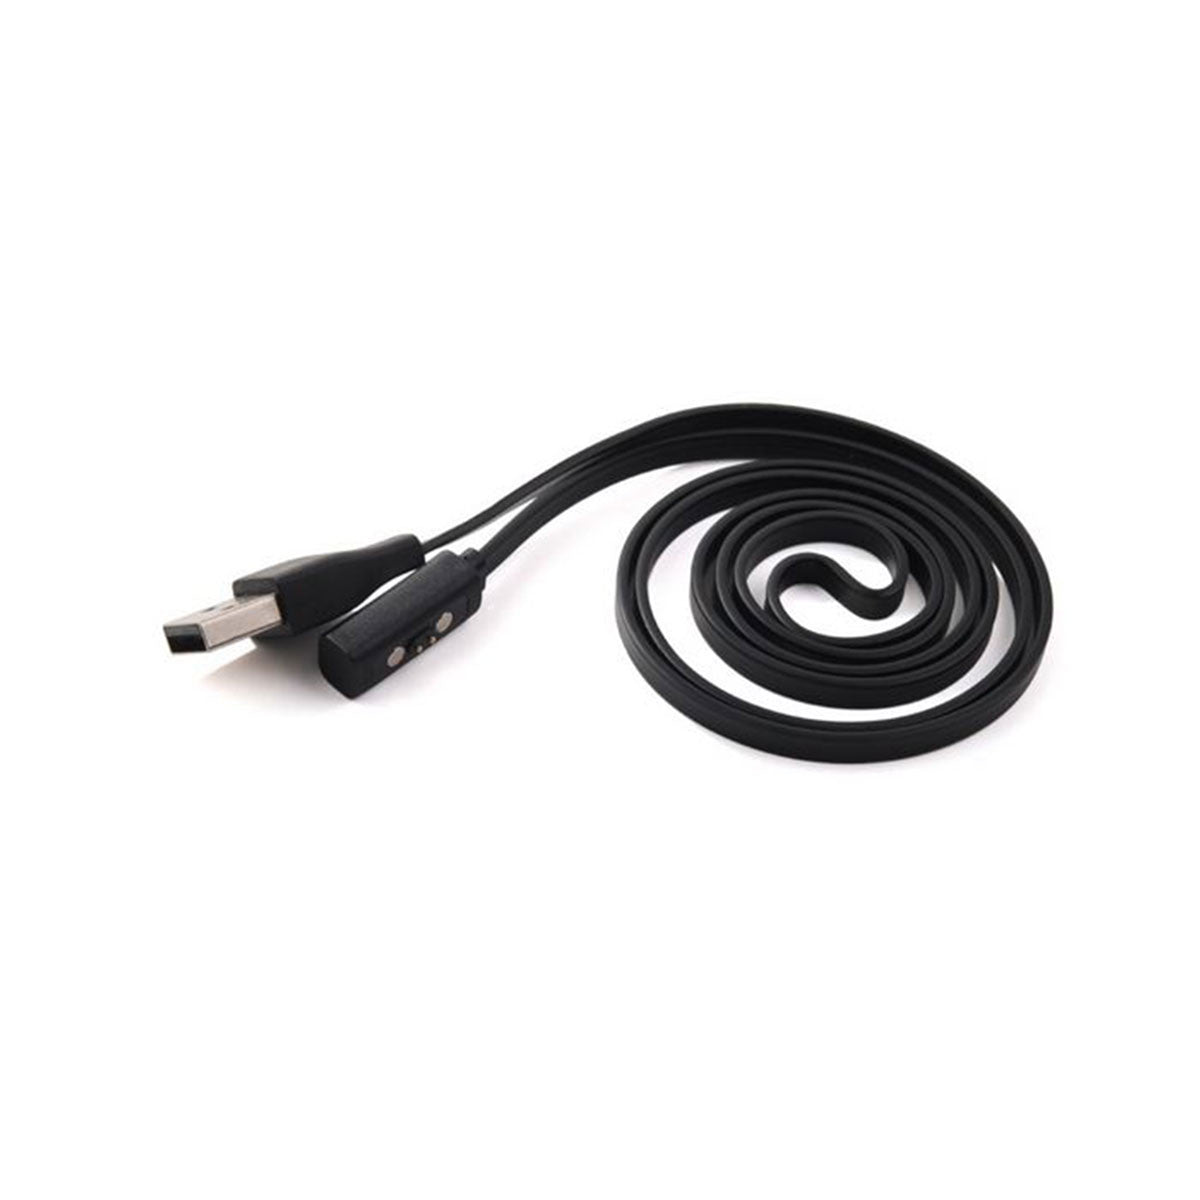 1m Pebble Time Steel Round Charging Cable Replacement Black  